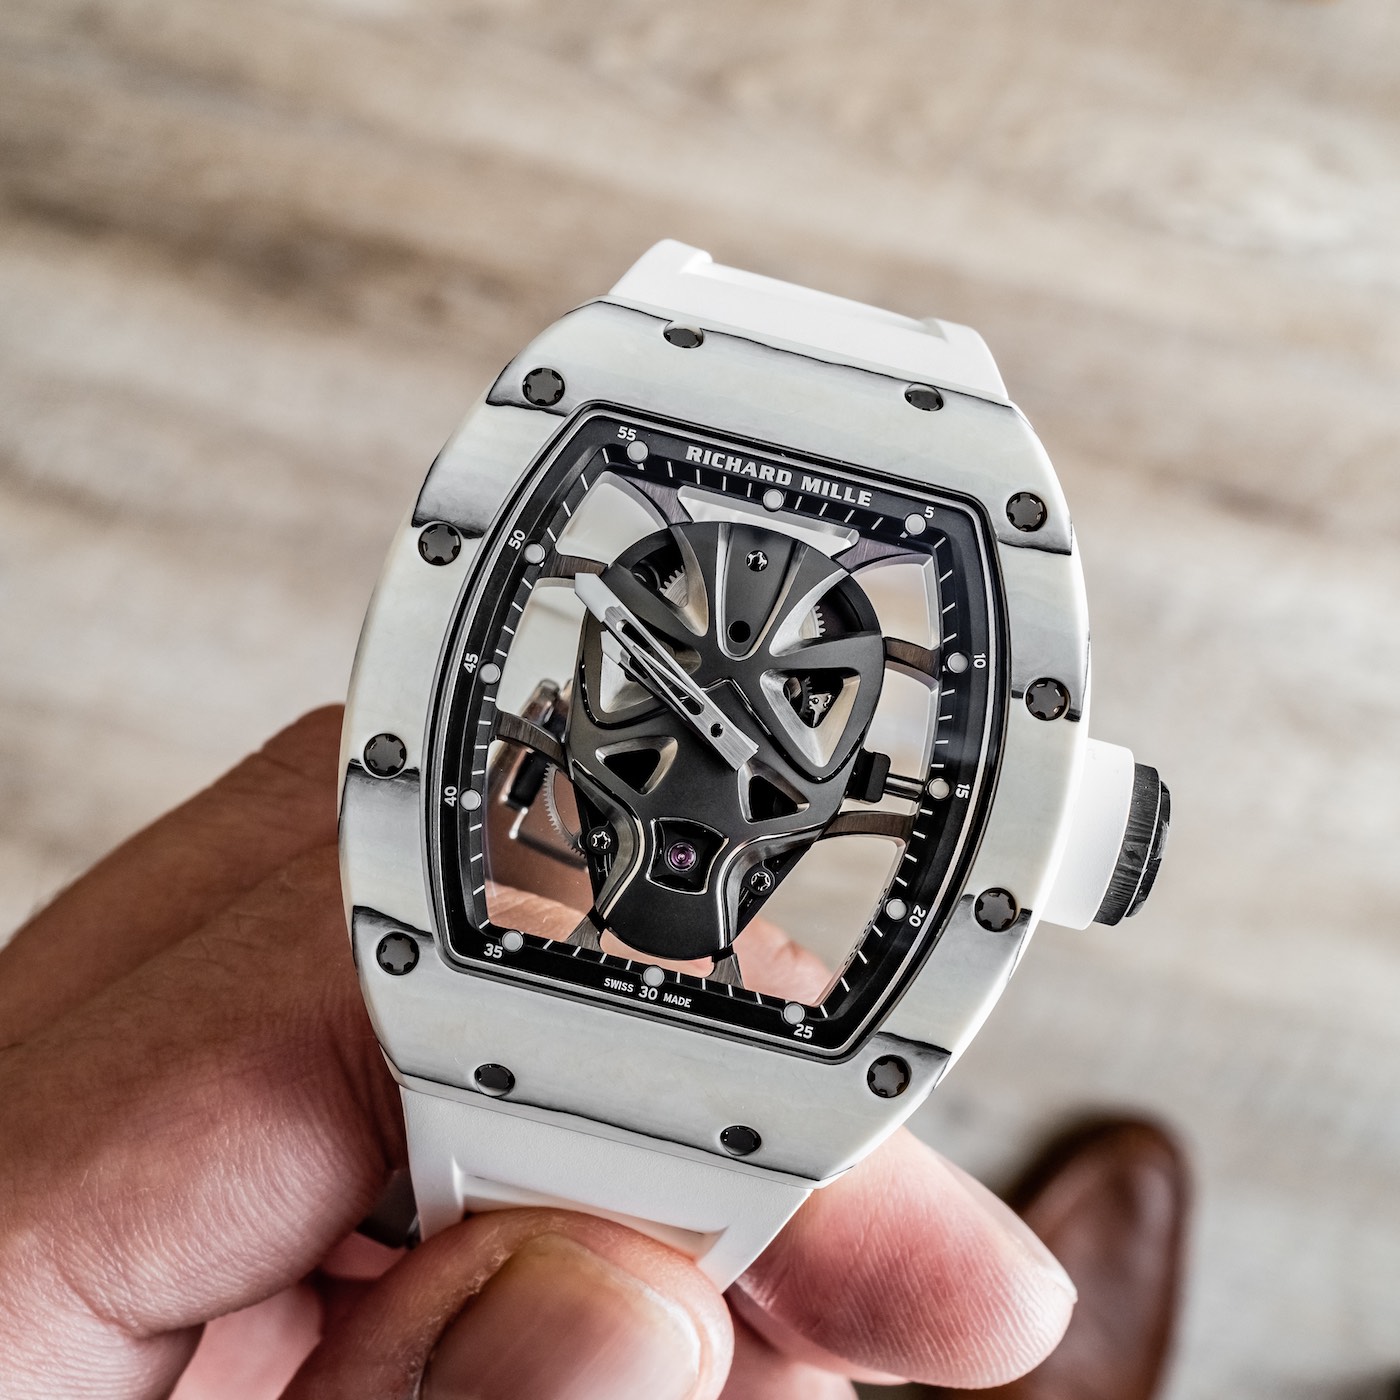 The $700,000 Richard Mille RM 52-06 